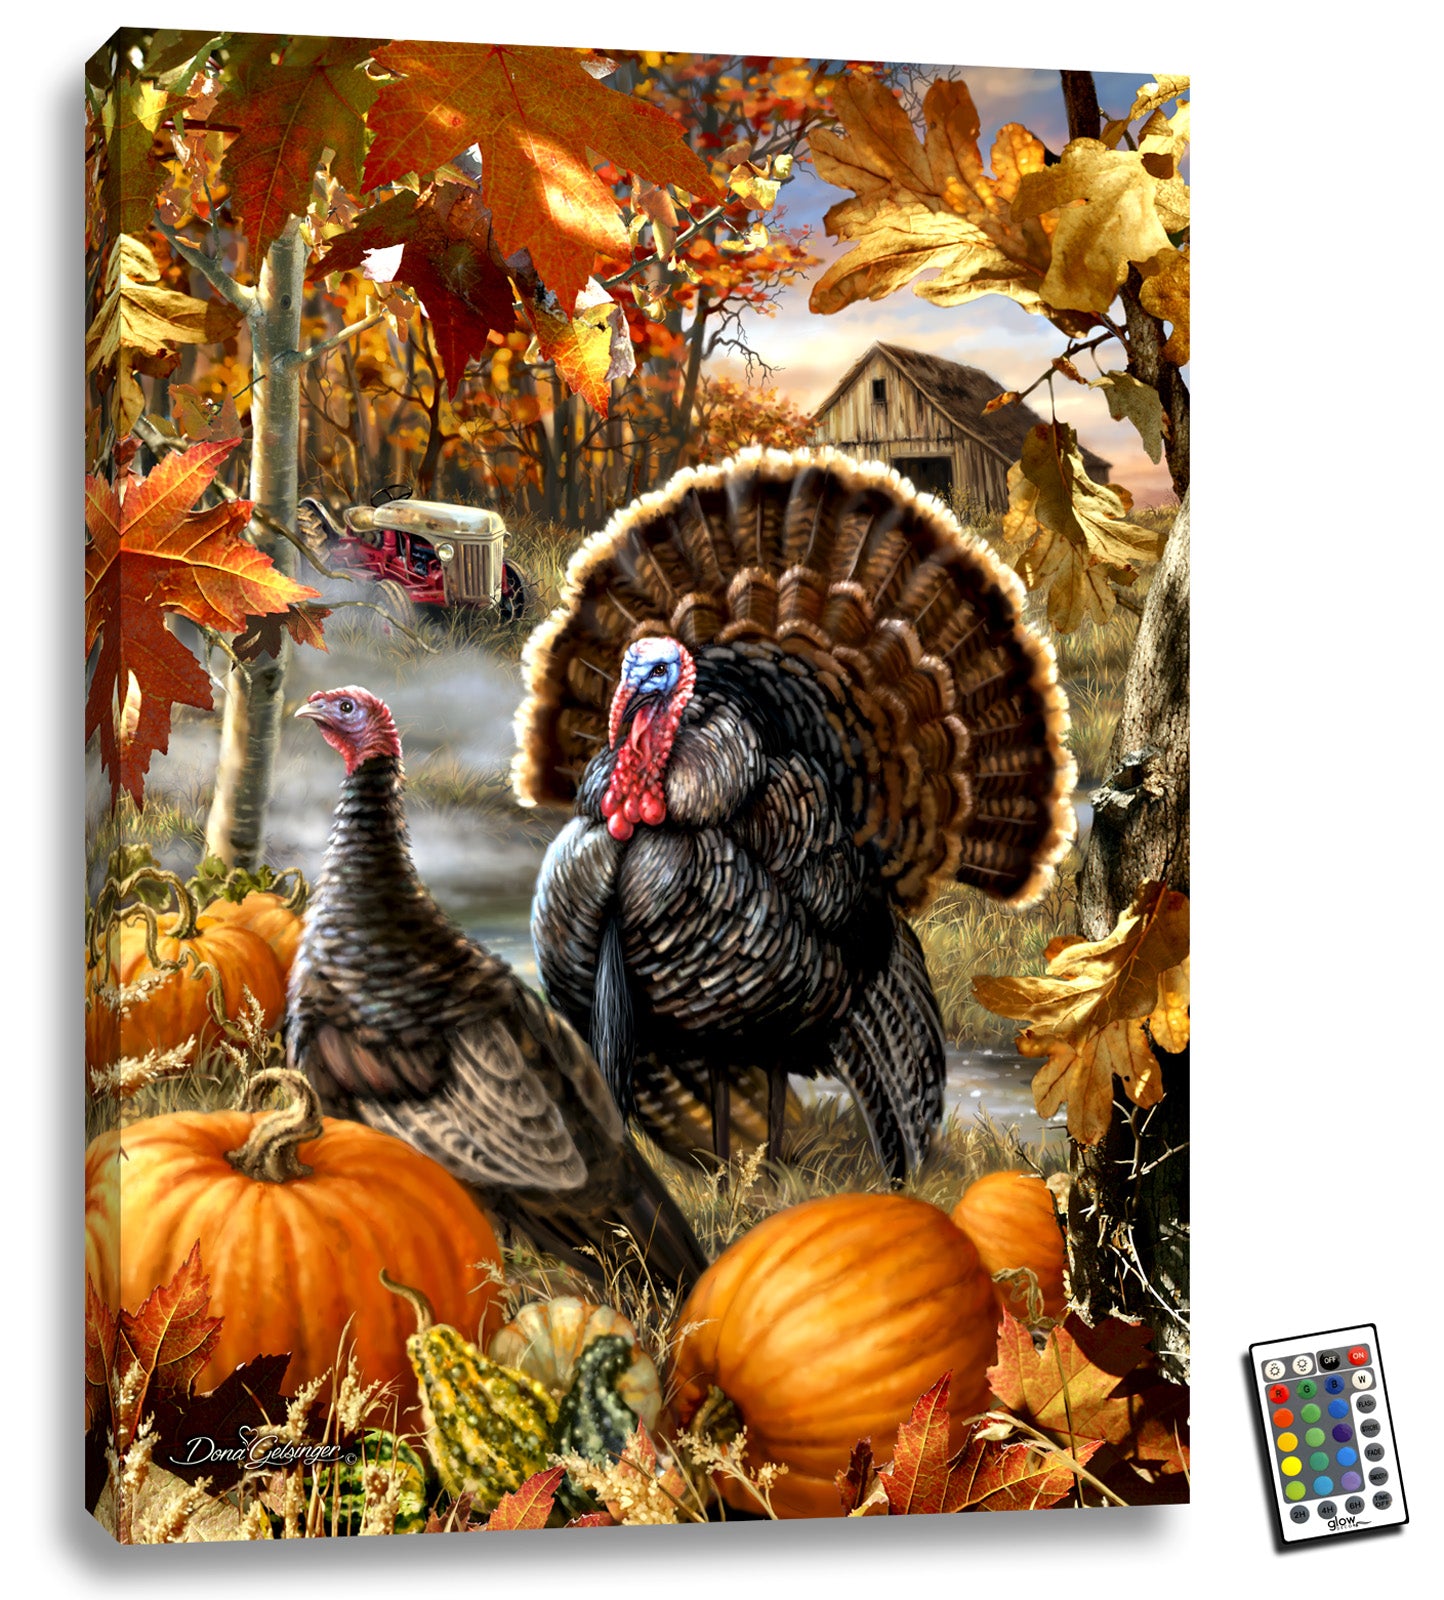 This captivating piece of artwork features two majestic turkeys standing proudly in the center of the frame, surrounded by vibrant pumpkins and gourds in the foreground. The intricate details of the turkeys' feathers and the bright, vivid colors of the fall produce create a truly stunning visual display that will leave you in awe.